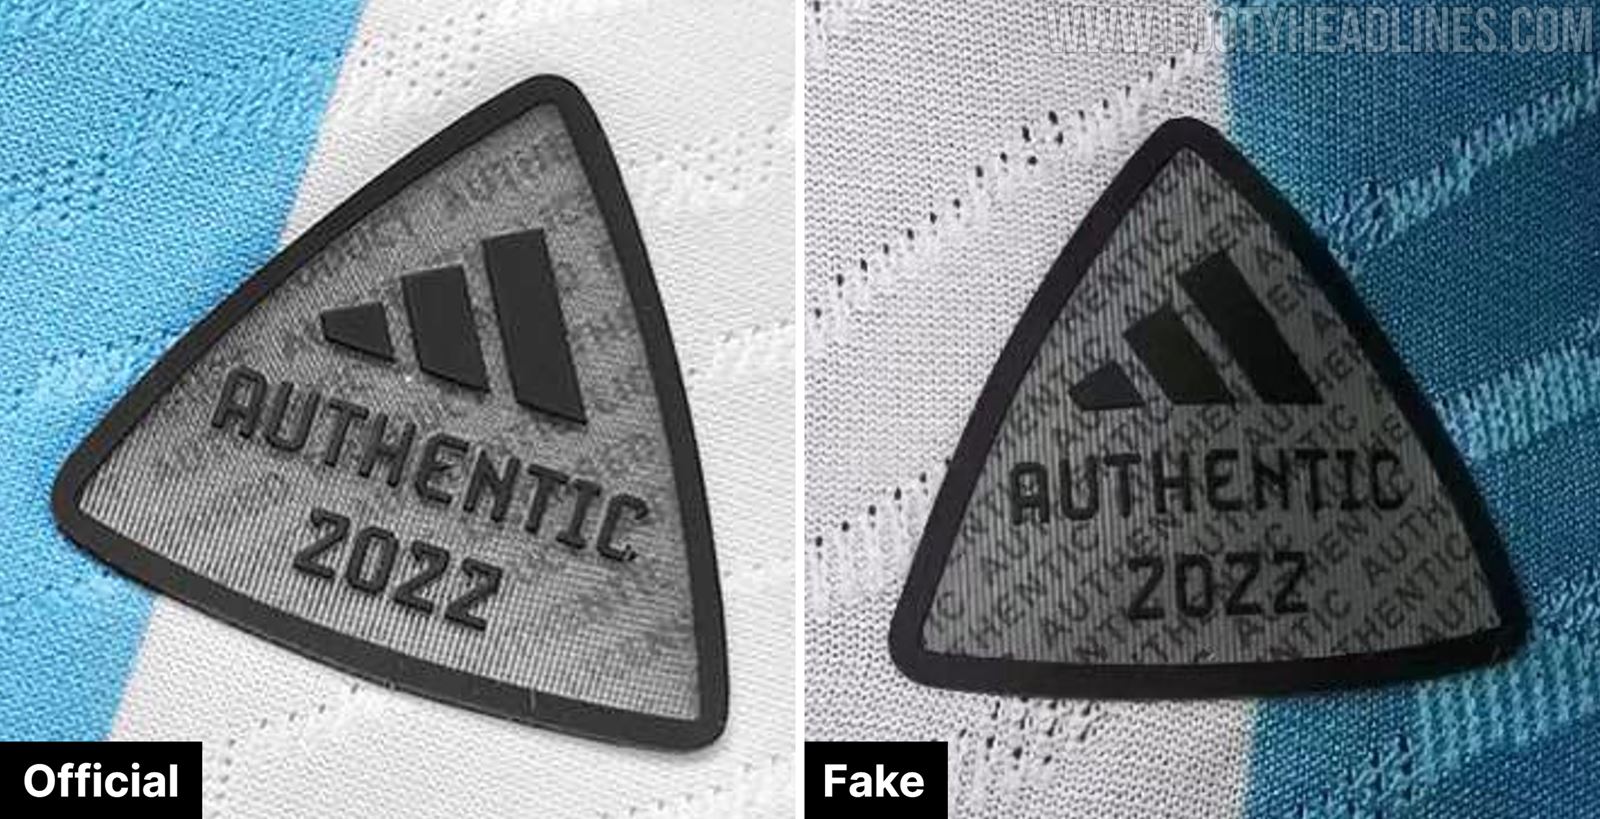 How to Spot a High-Quality Authentic Adidas 2022 World Cup Kit - Footy Headlines